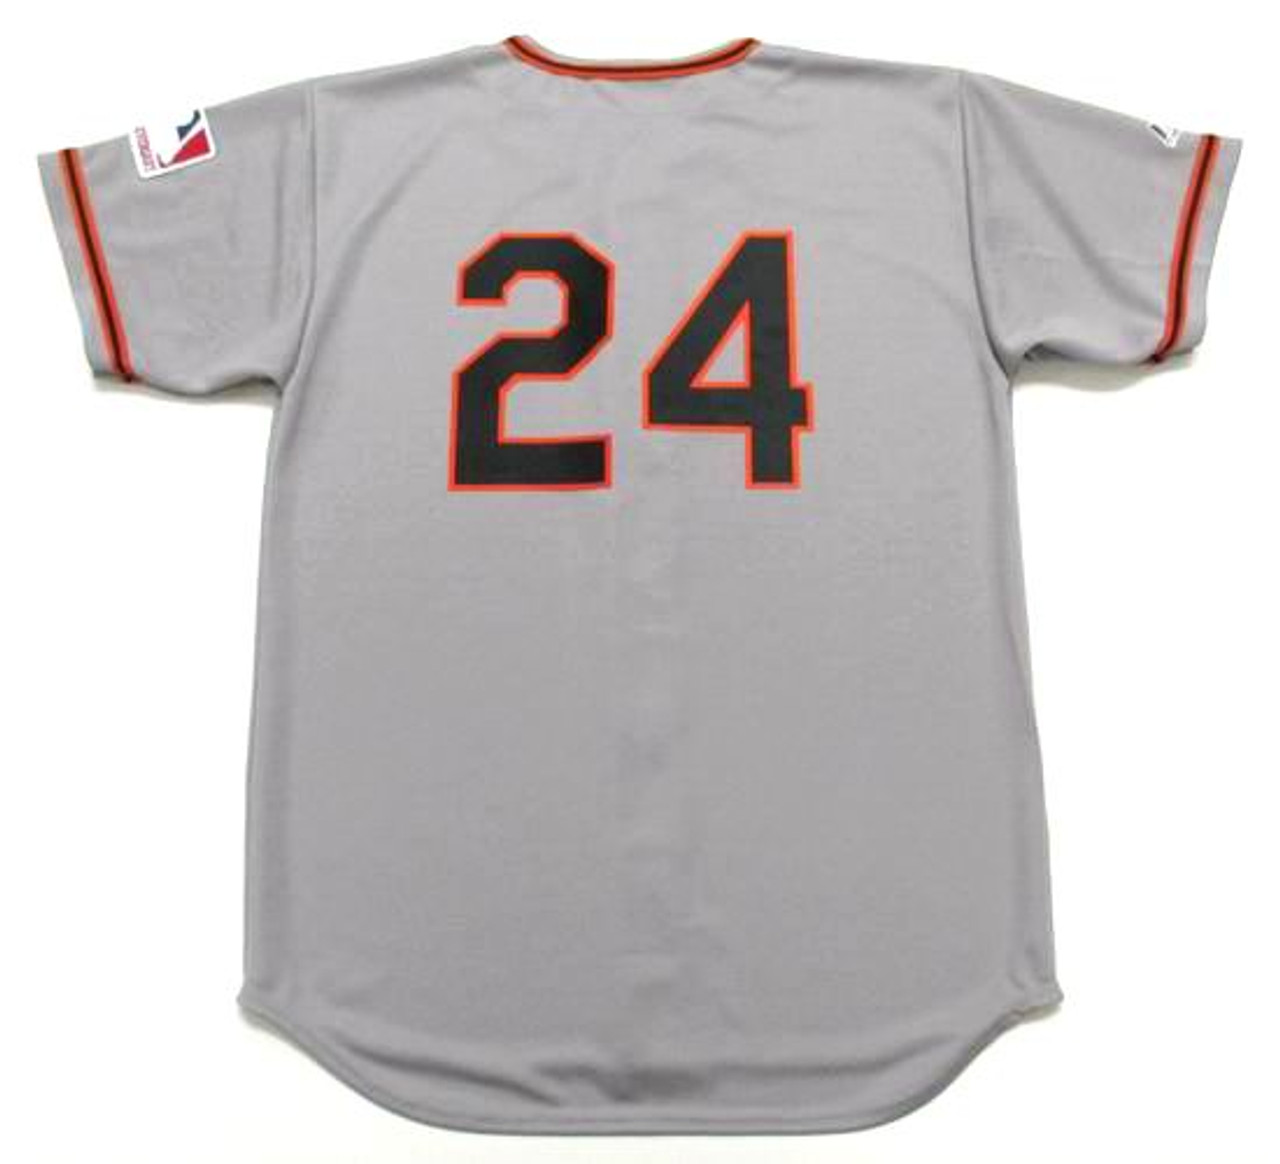 AUTHENTIC MAJESTIC WILLIE MAYS 44 LARGE SAN FRANCISCO GIANTS FLEX BASE  Jersey